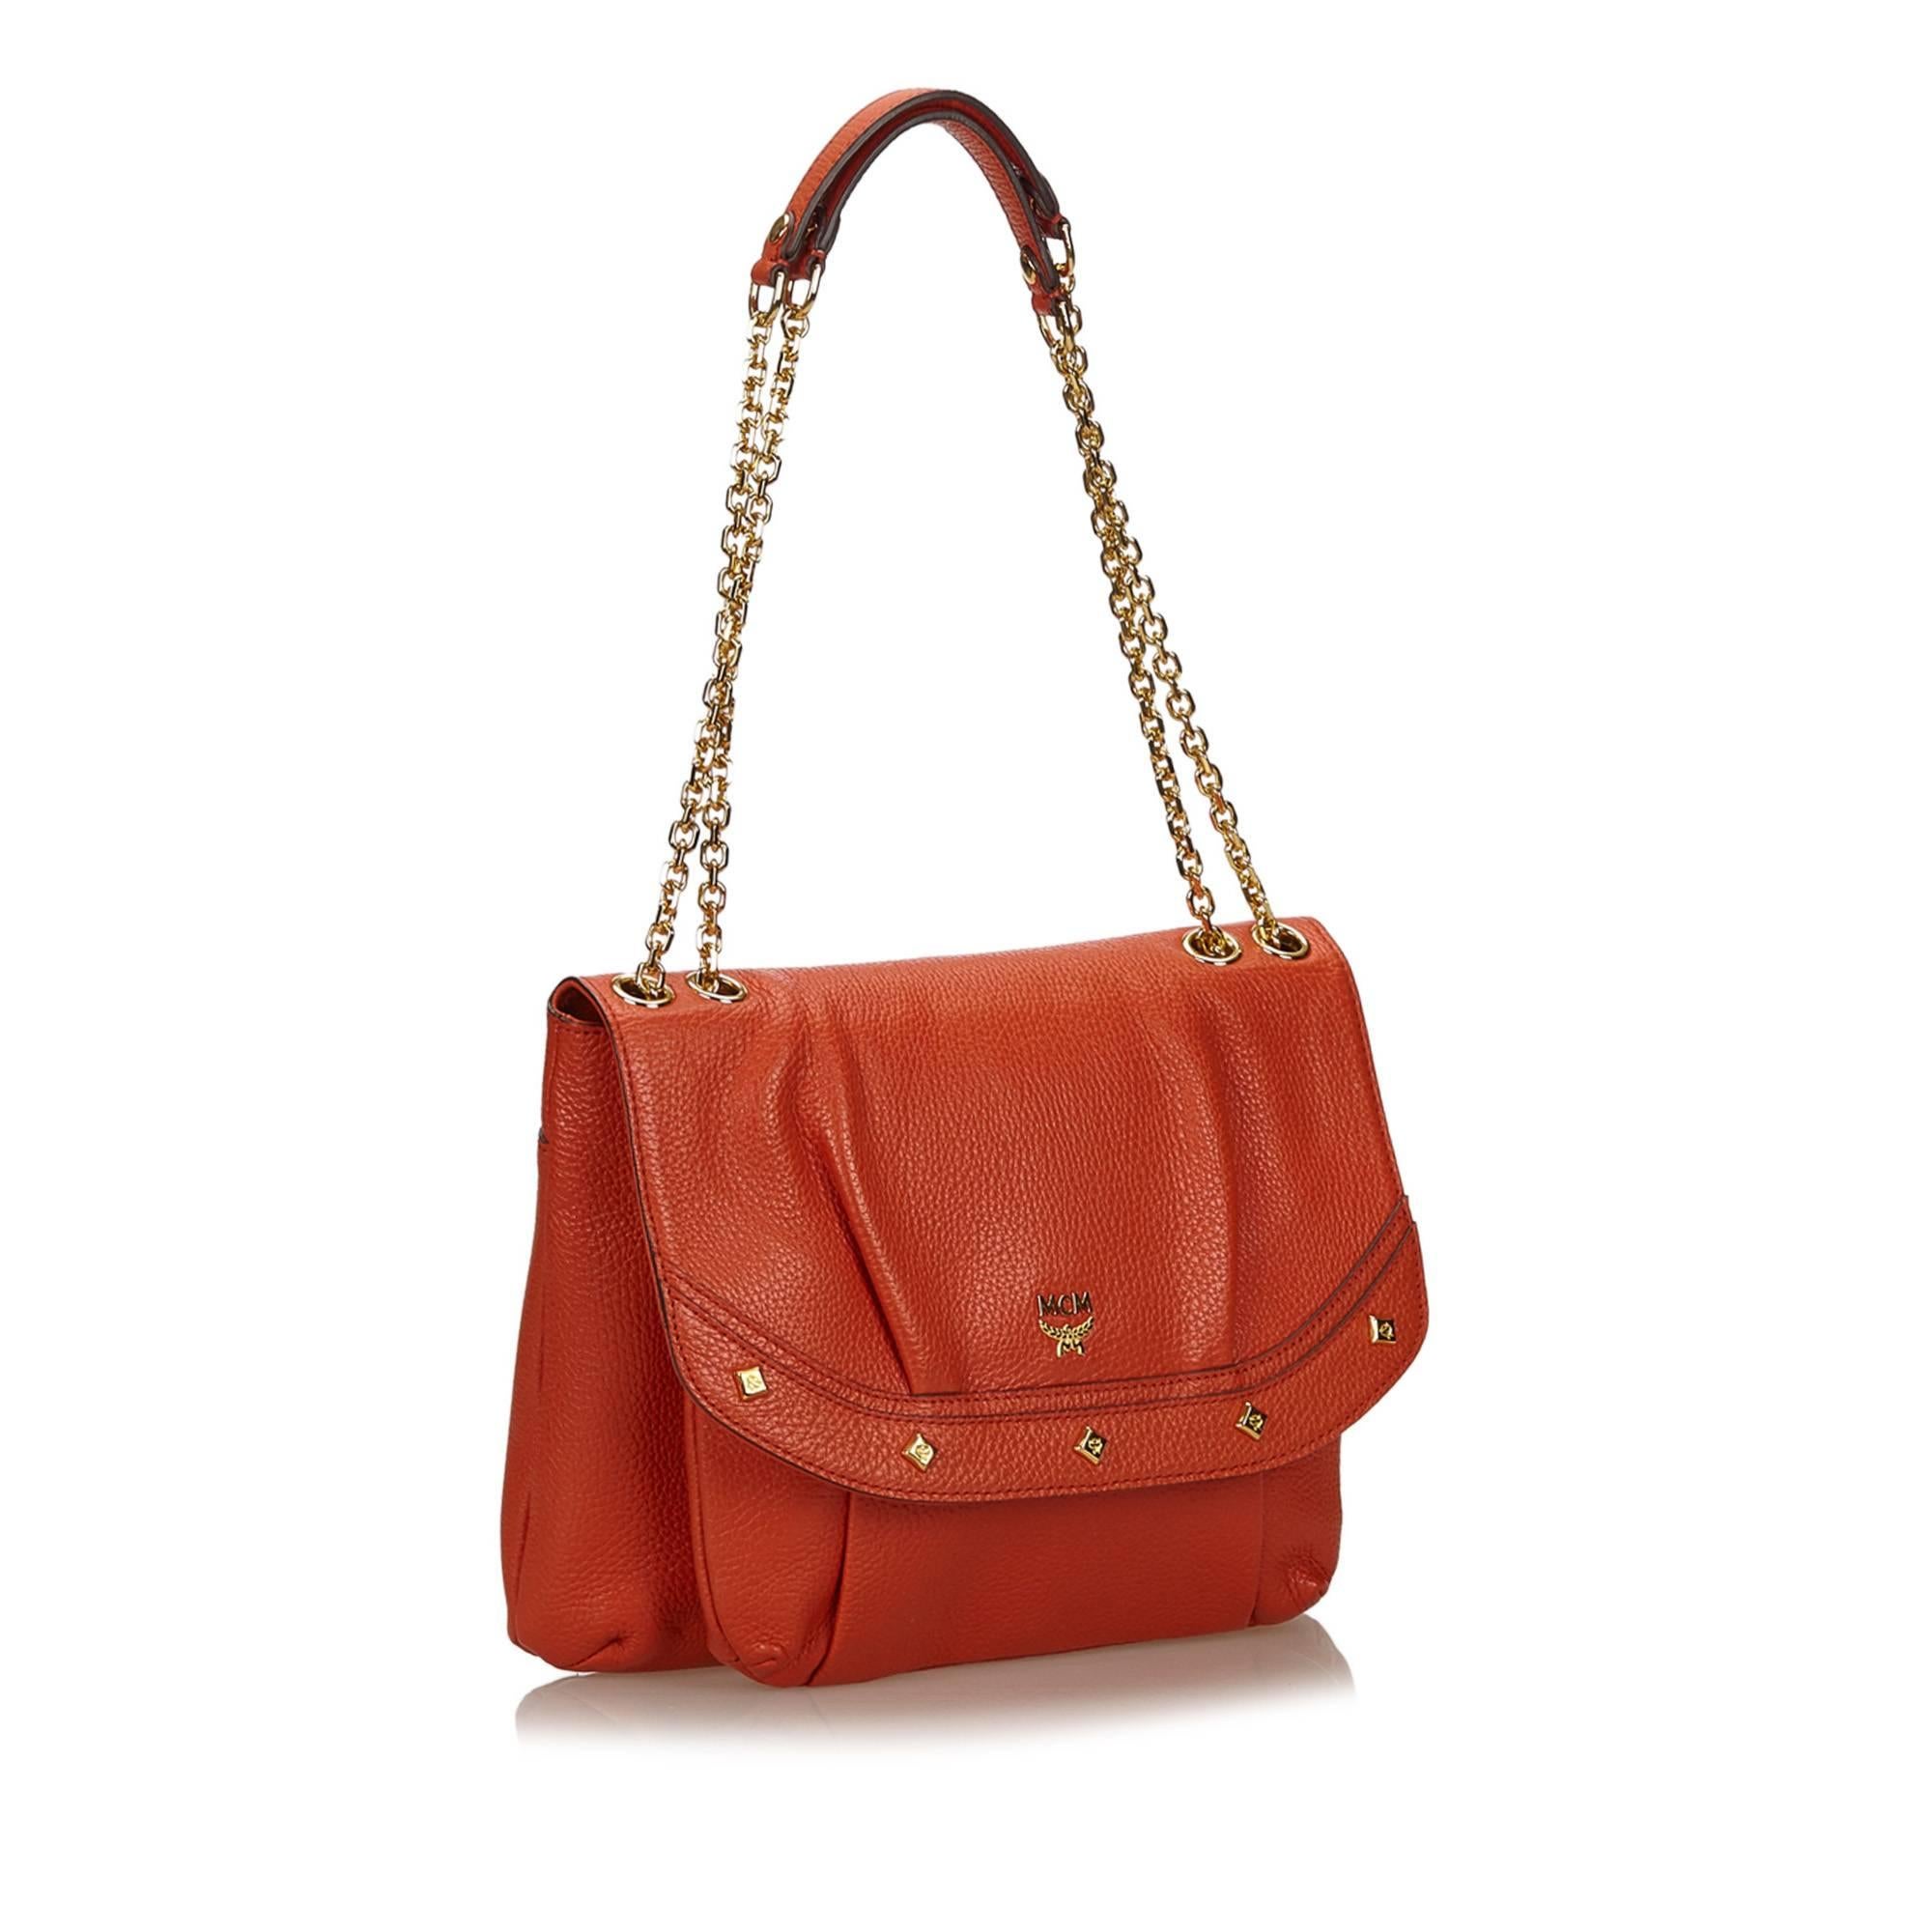 This shoulder bag features a leather body, gold-tone studs, flat leather straps with gold-tone chain, front flap, and interior zip and slip pockets. 

It carries an A condition rating.

Dimensions: 
Length 24 cm
Width 29 cm
Depth 3 cm
Shoulder Drop